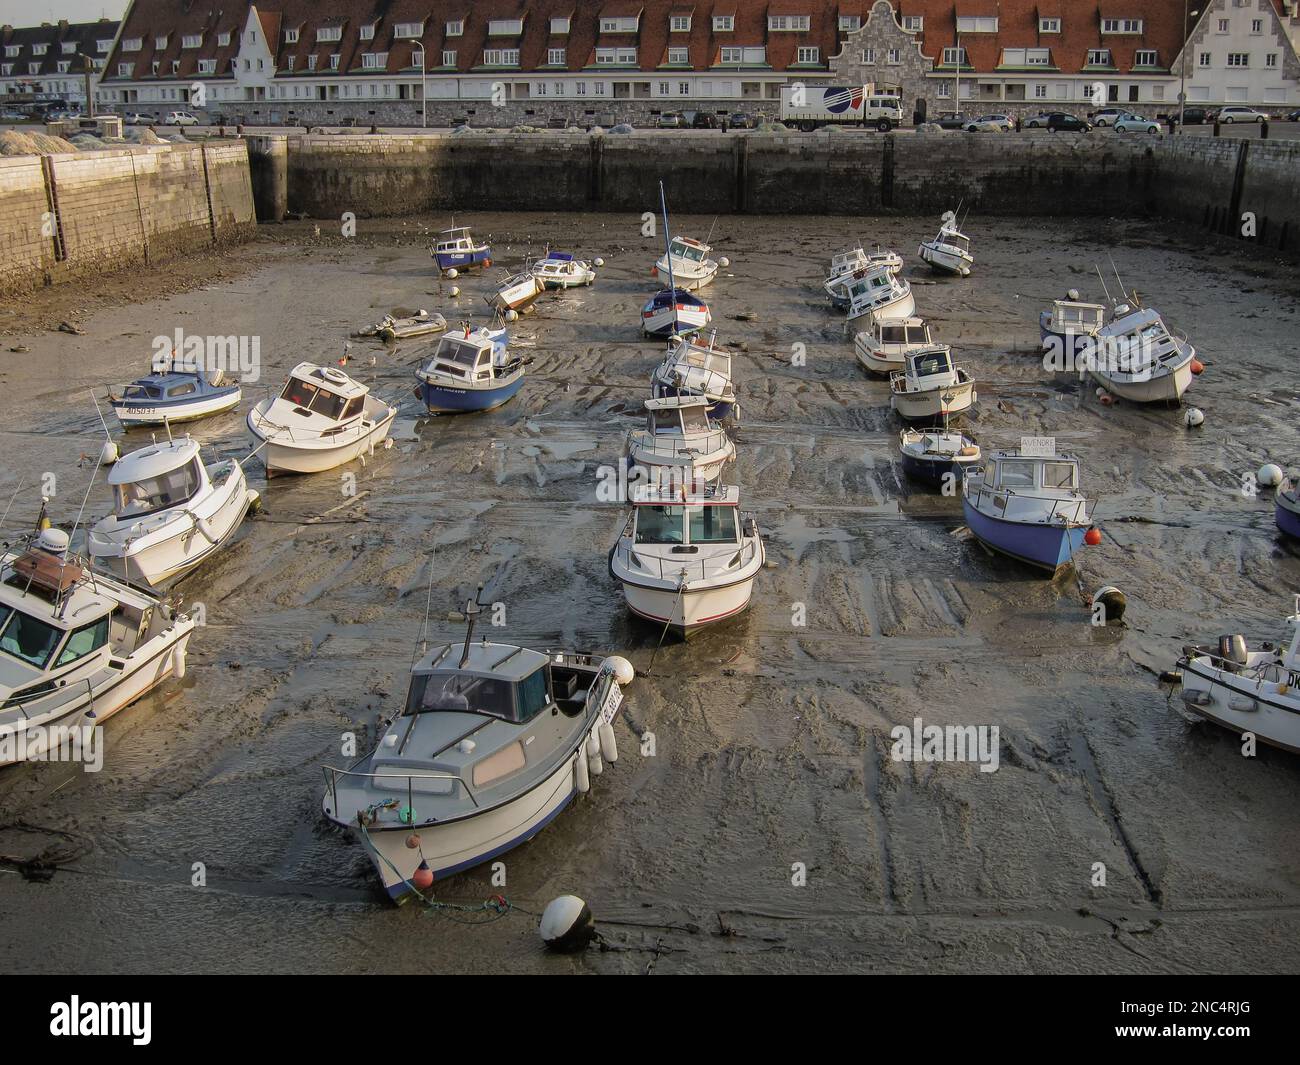 Many boat aground on the shore at low tide in Calais, France. Stock Photo